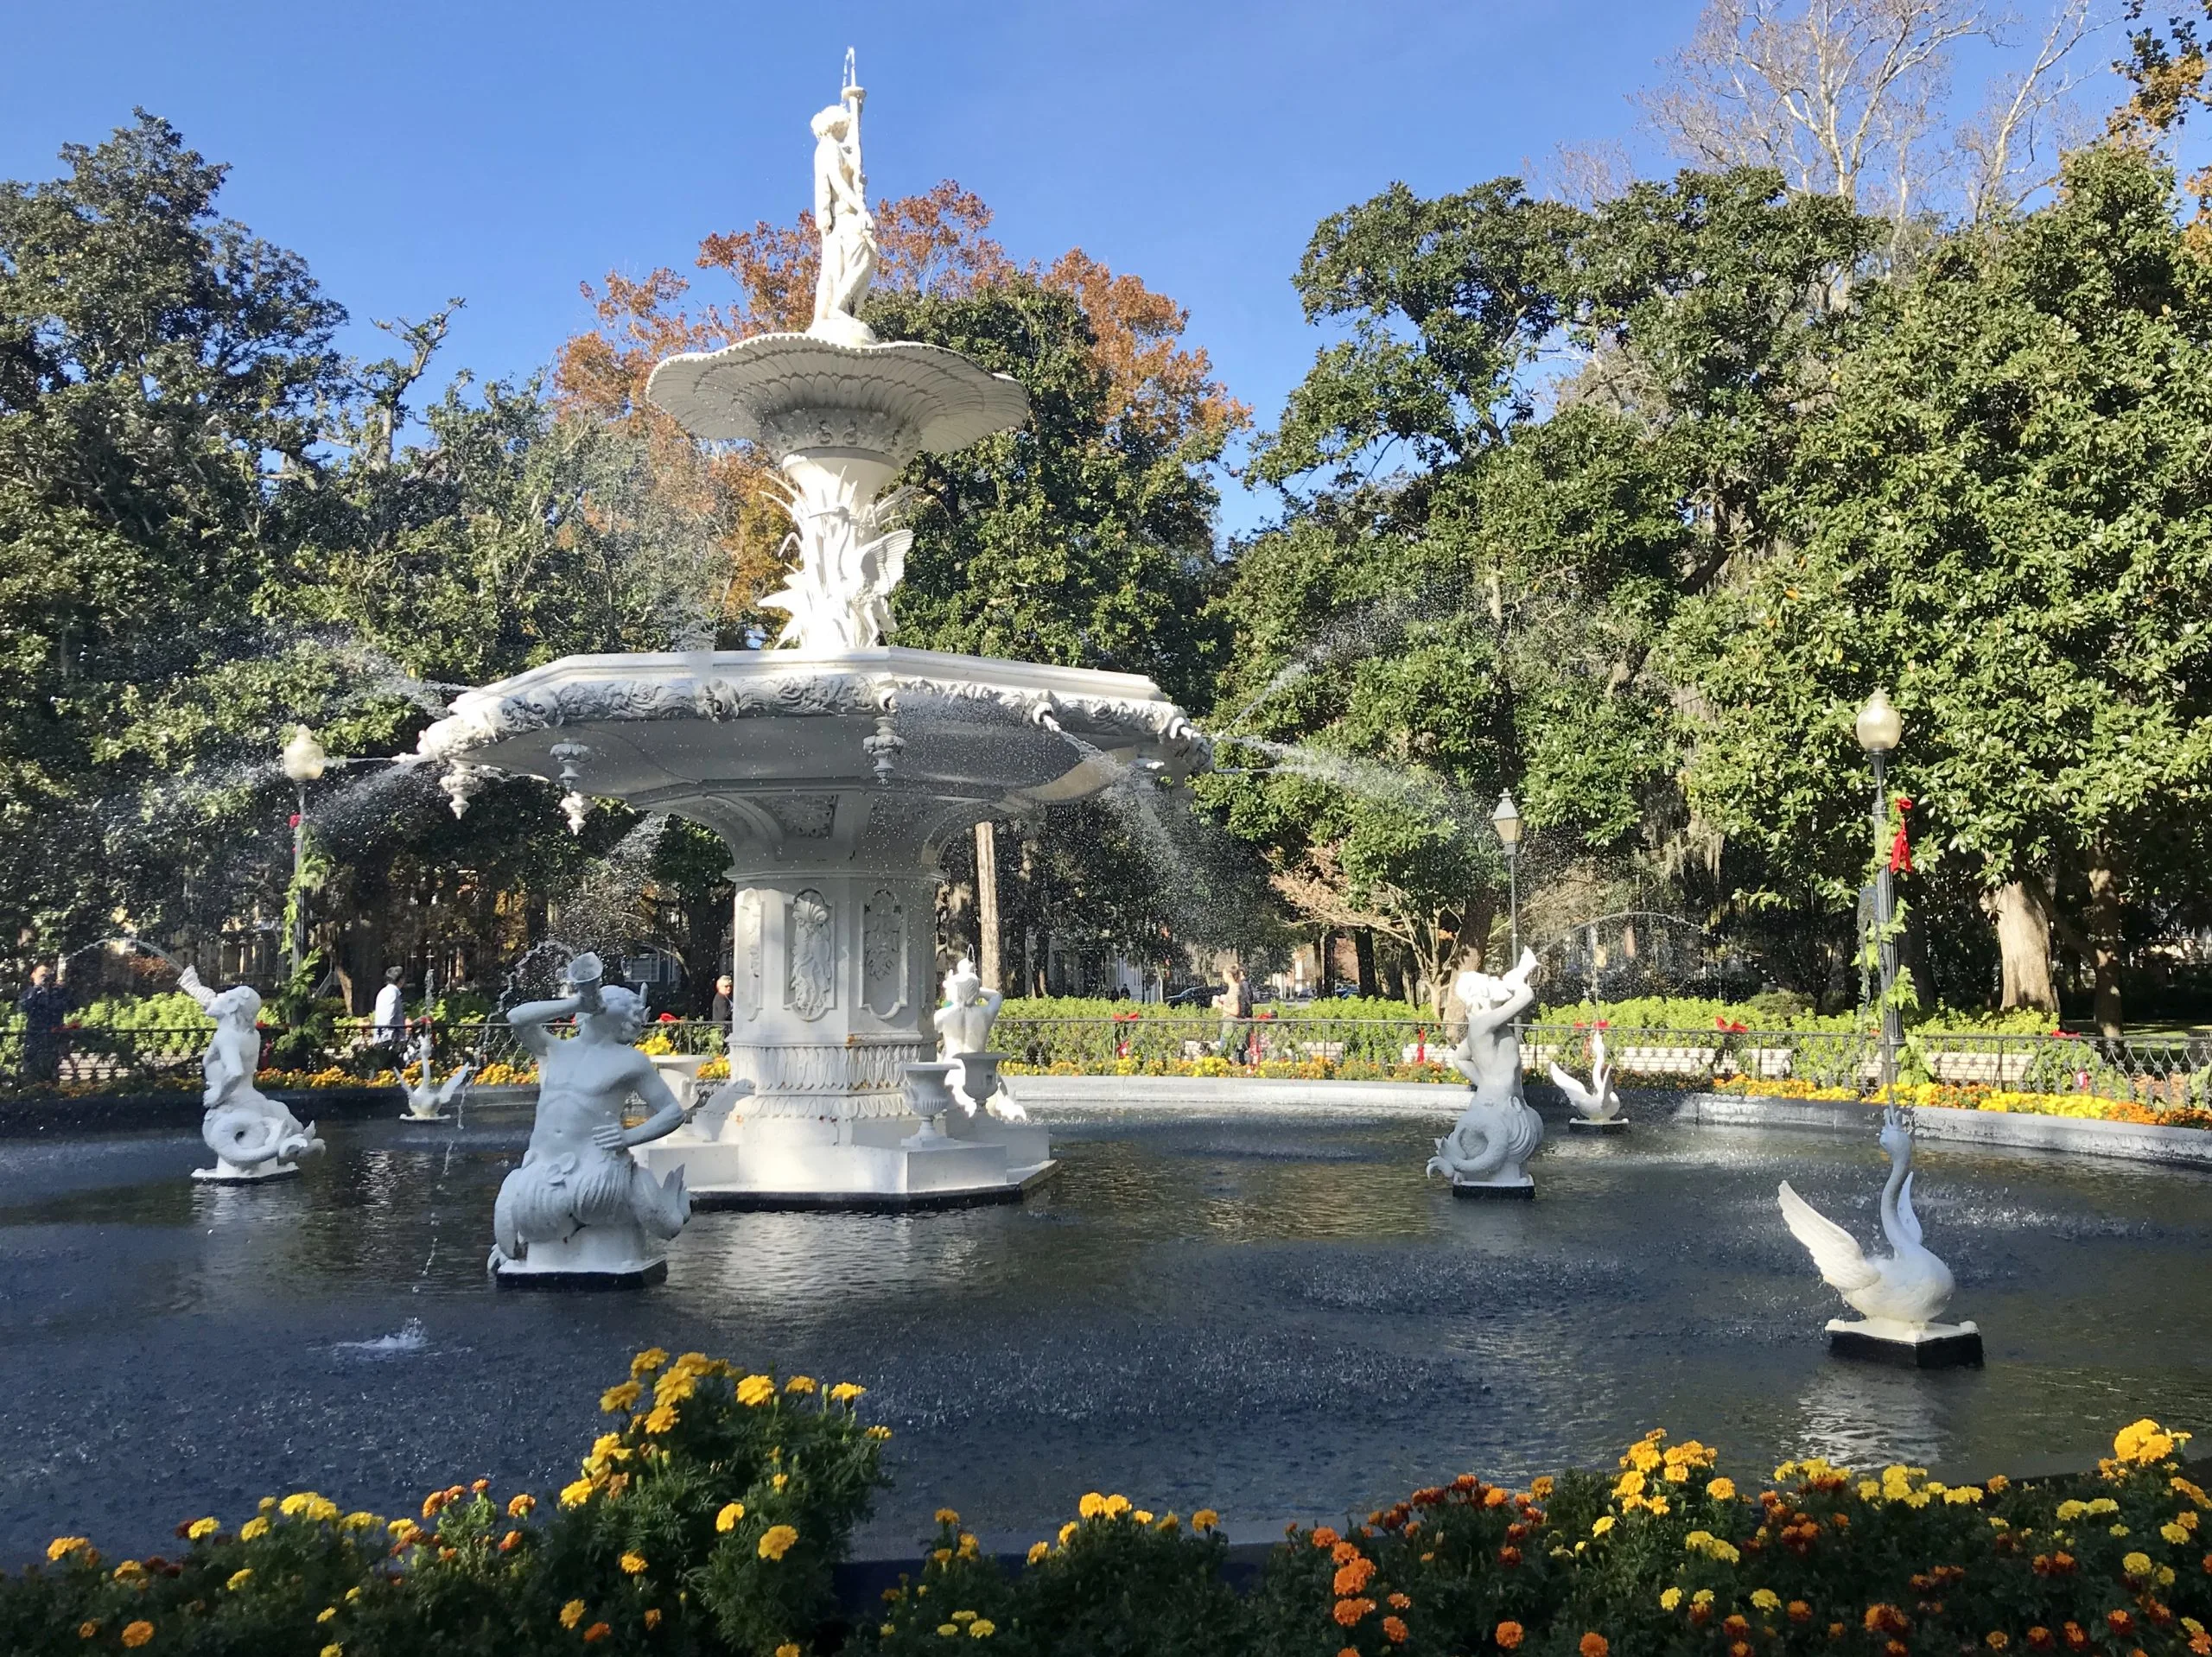 forsyth park fountain - things to do in savannah with kids